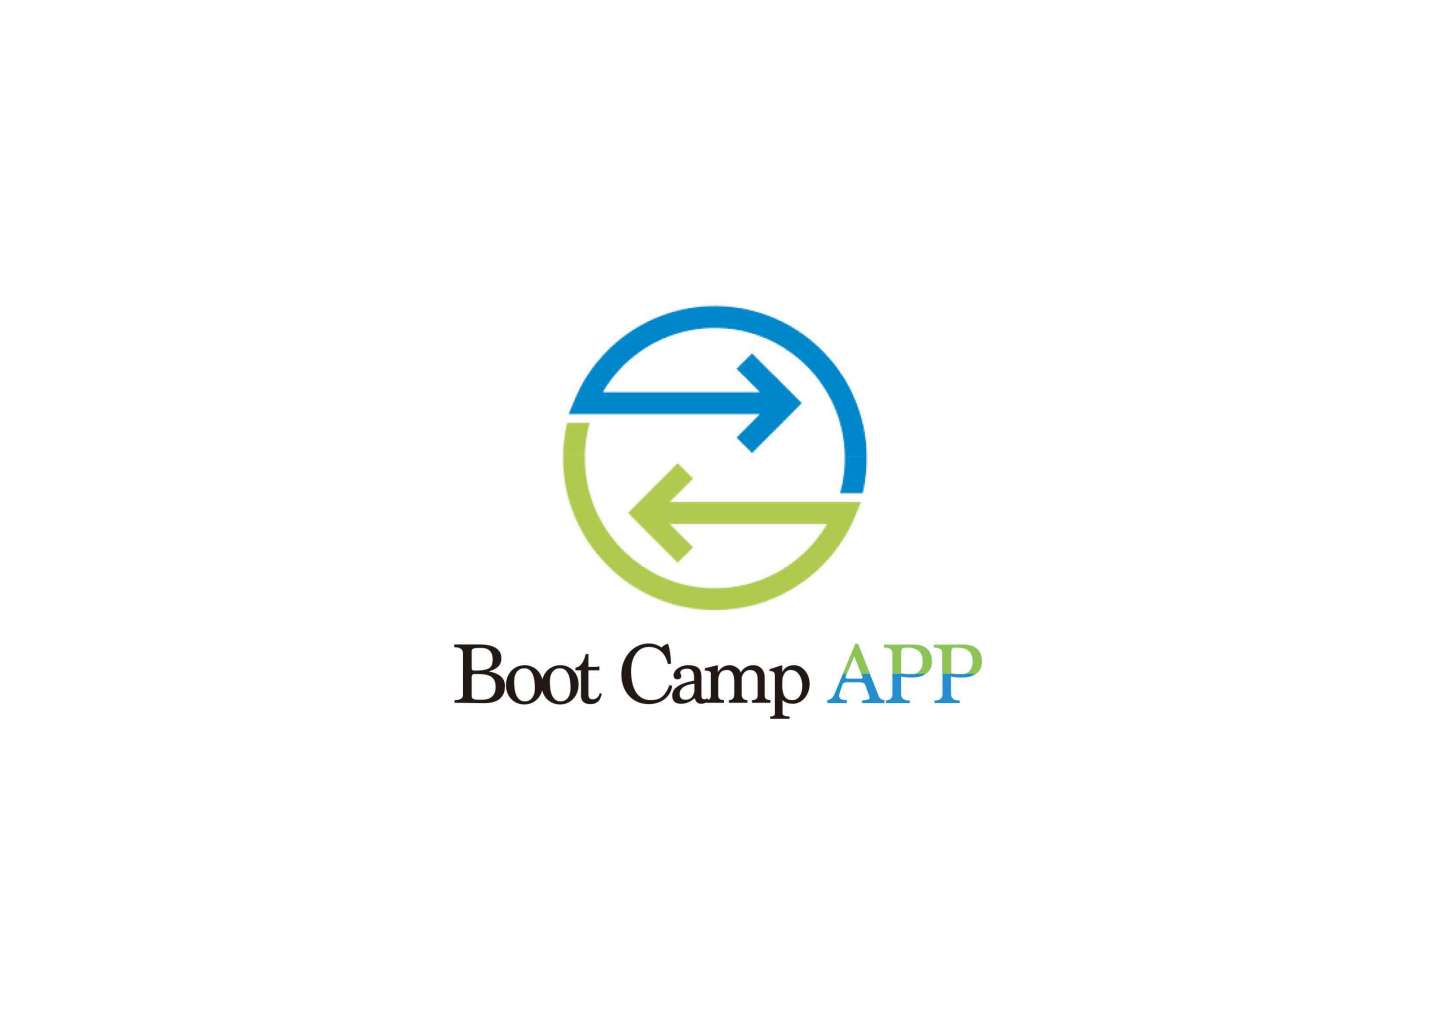 Bootcamp APP for foldable smartphone